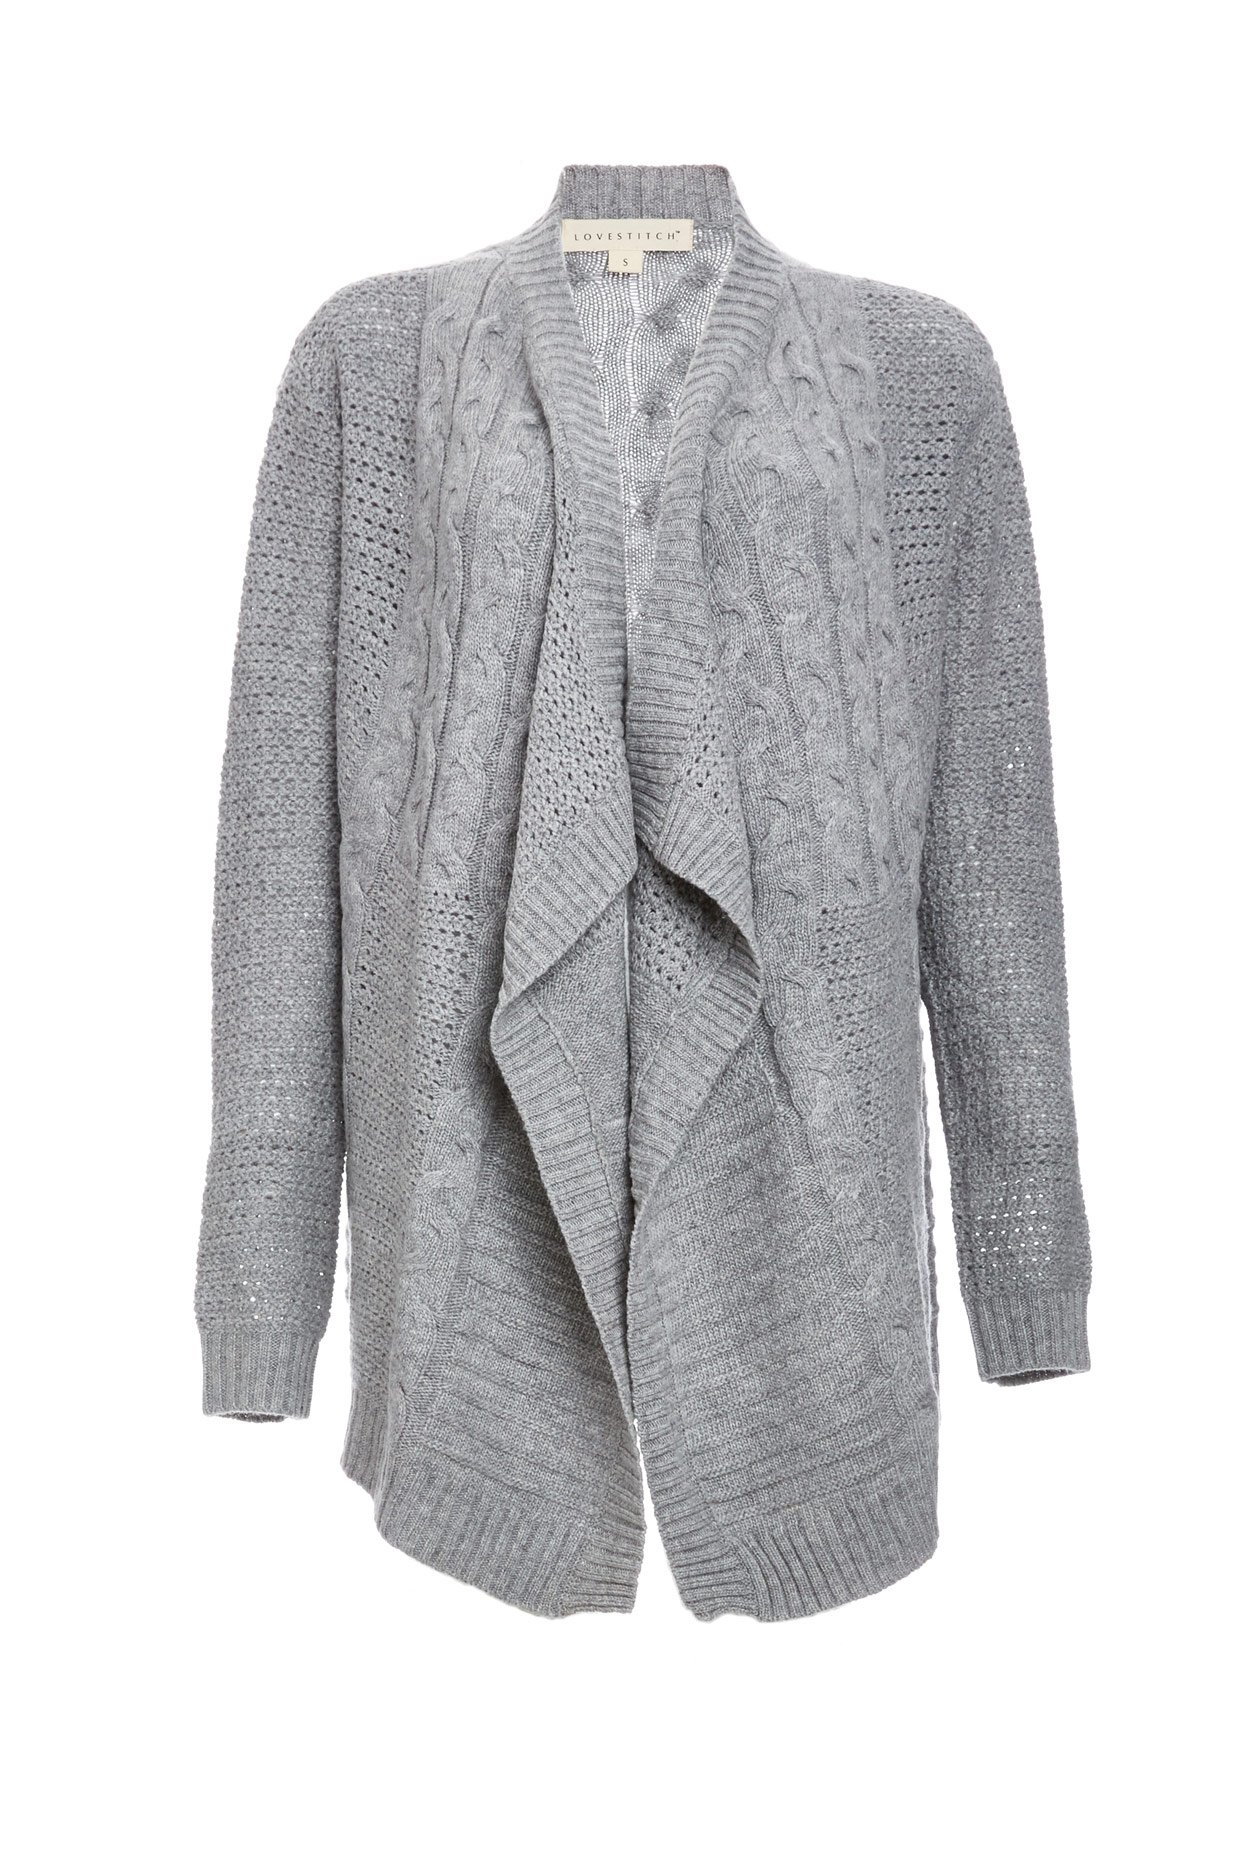 Simone Lightweight Cable Knit Cardigan in Grey | DAILYLOOK